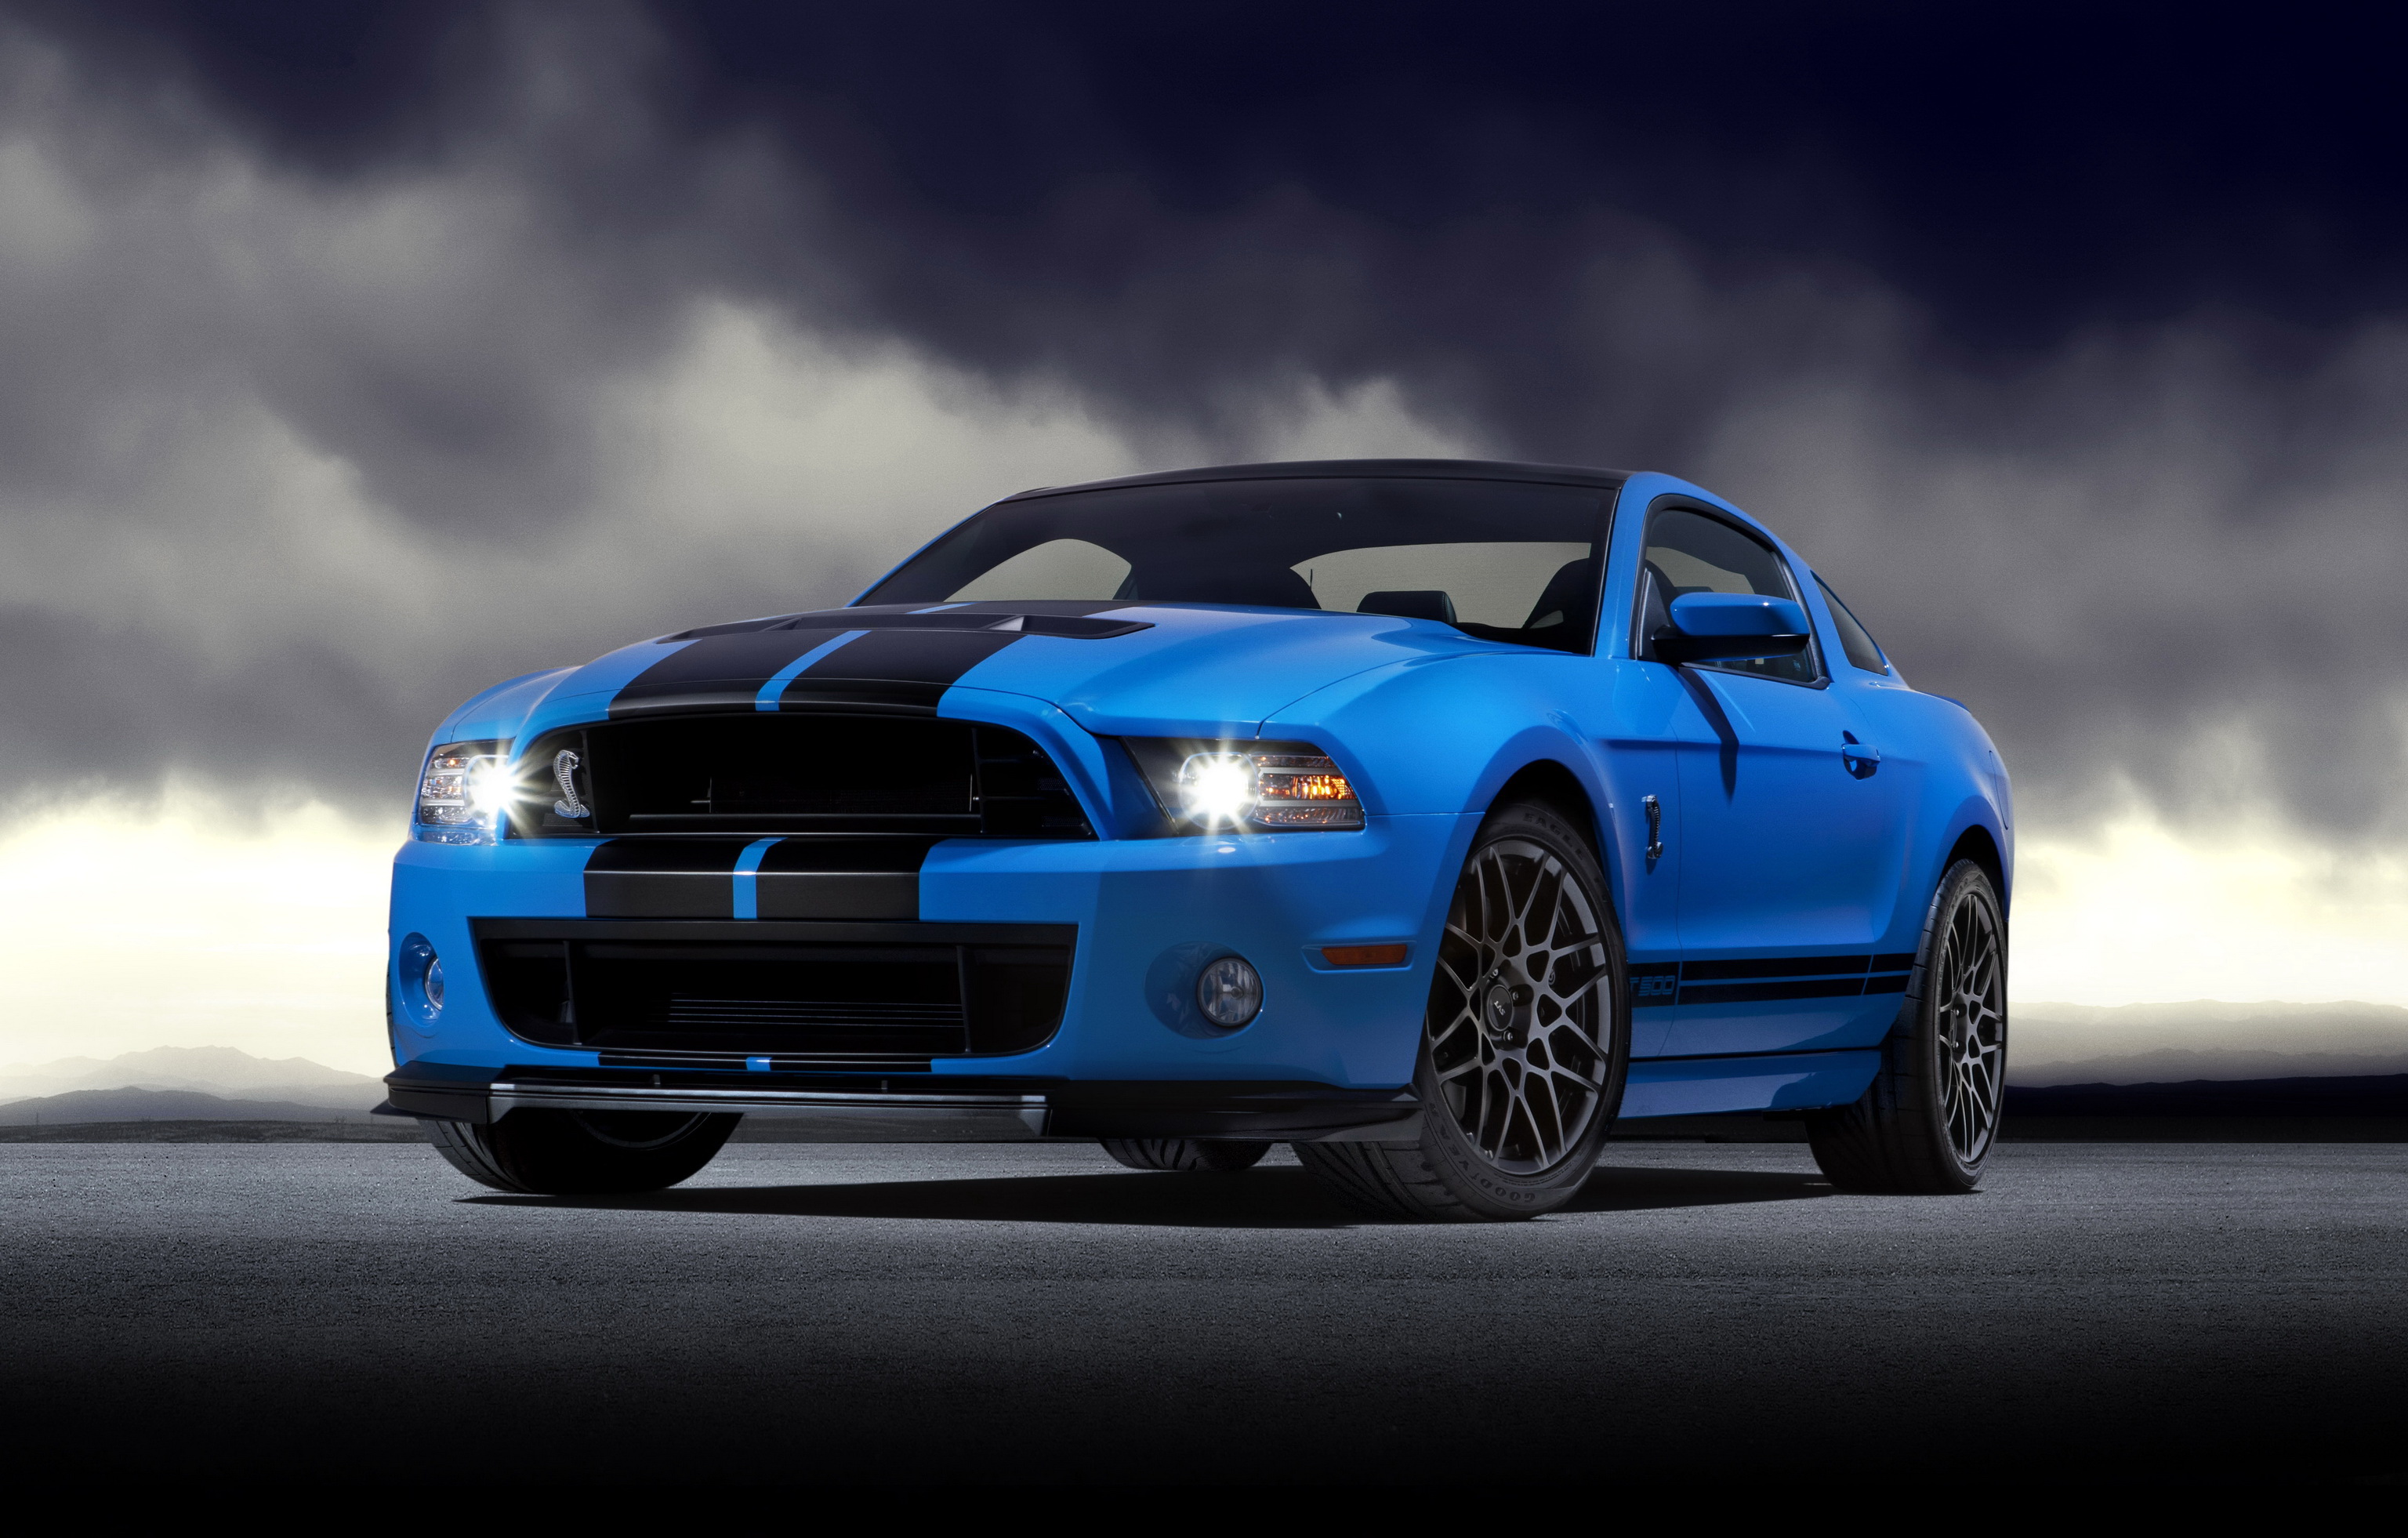 2014 Ford Mustang Shelby GT500 фото, цена, характеристики ...